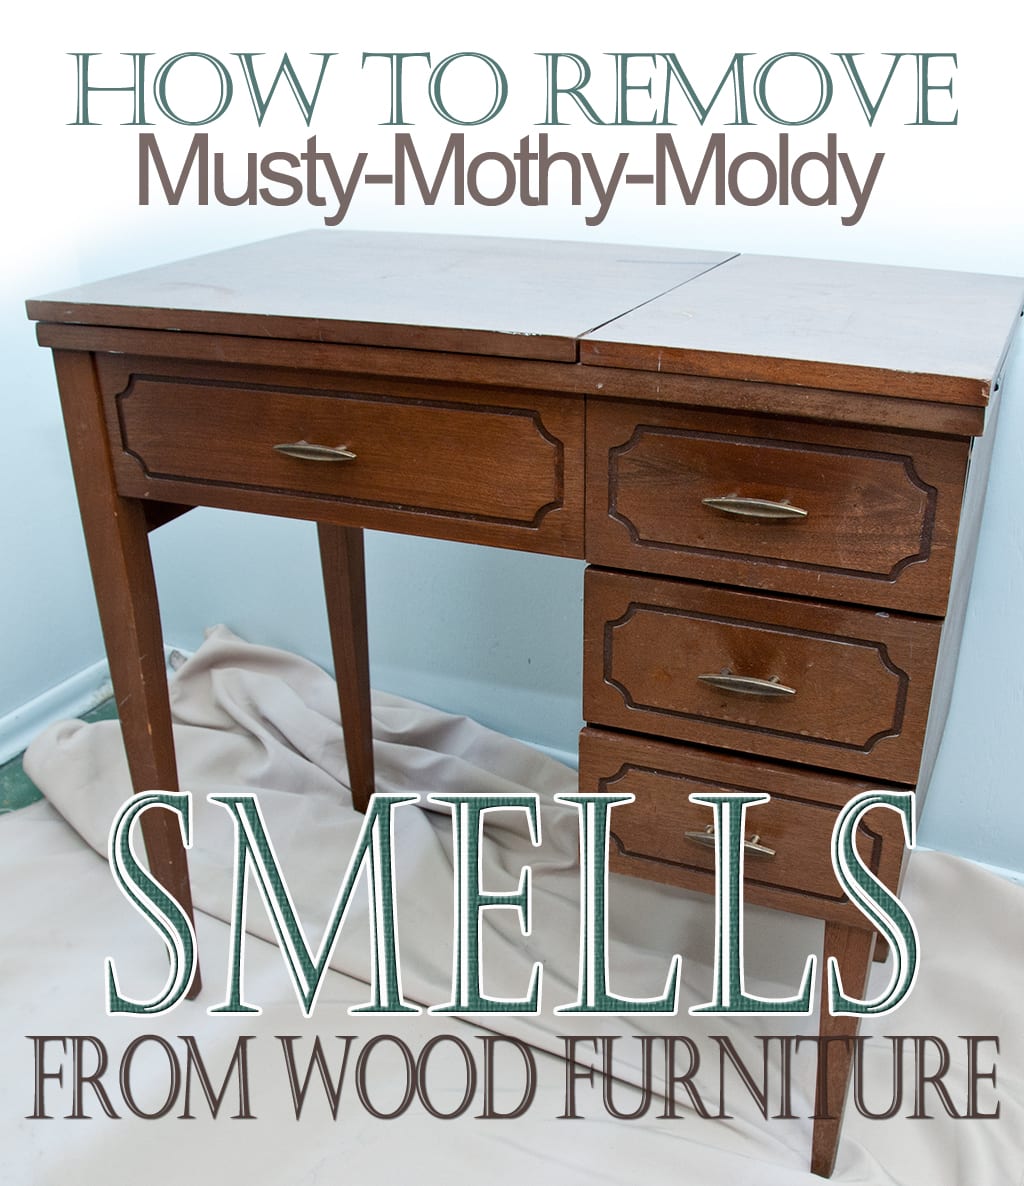 How To Remove Paint And Varnish From Wood Furniture Click To See